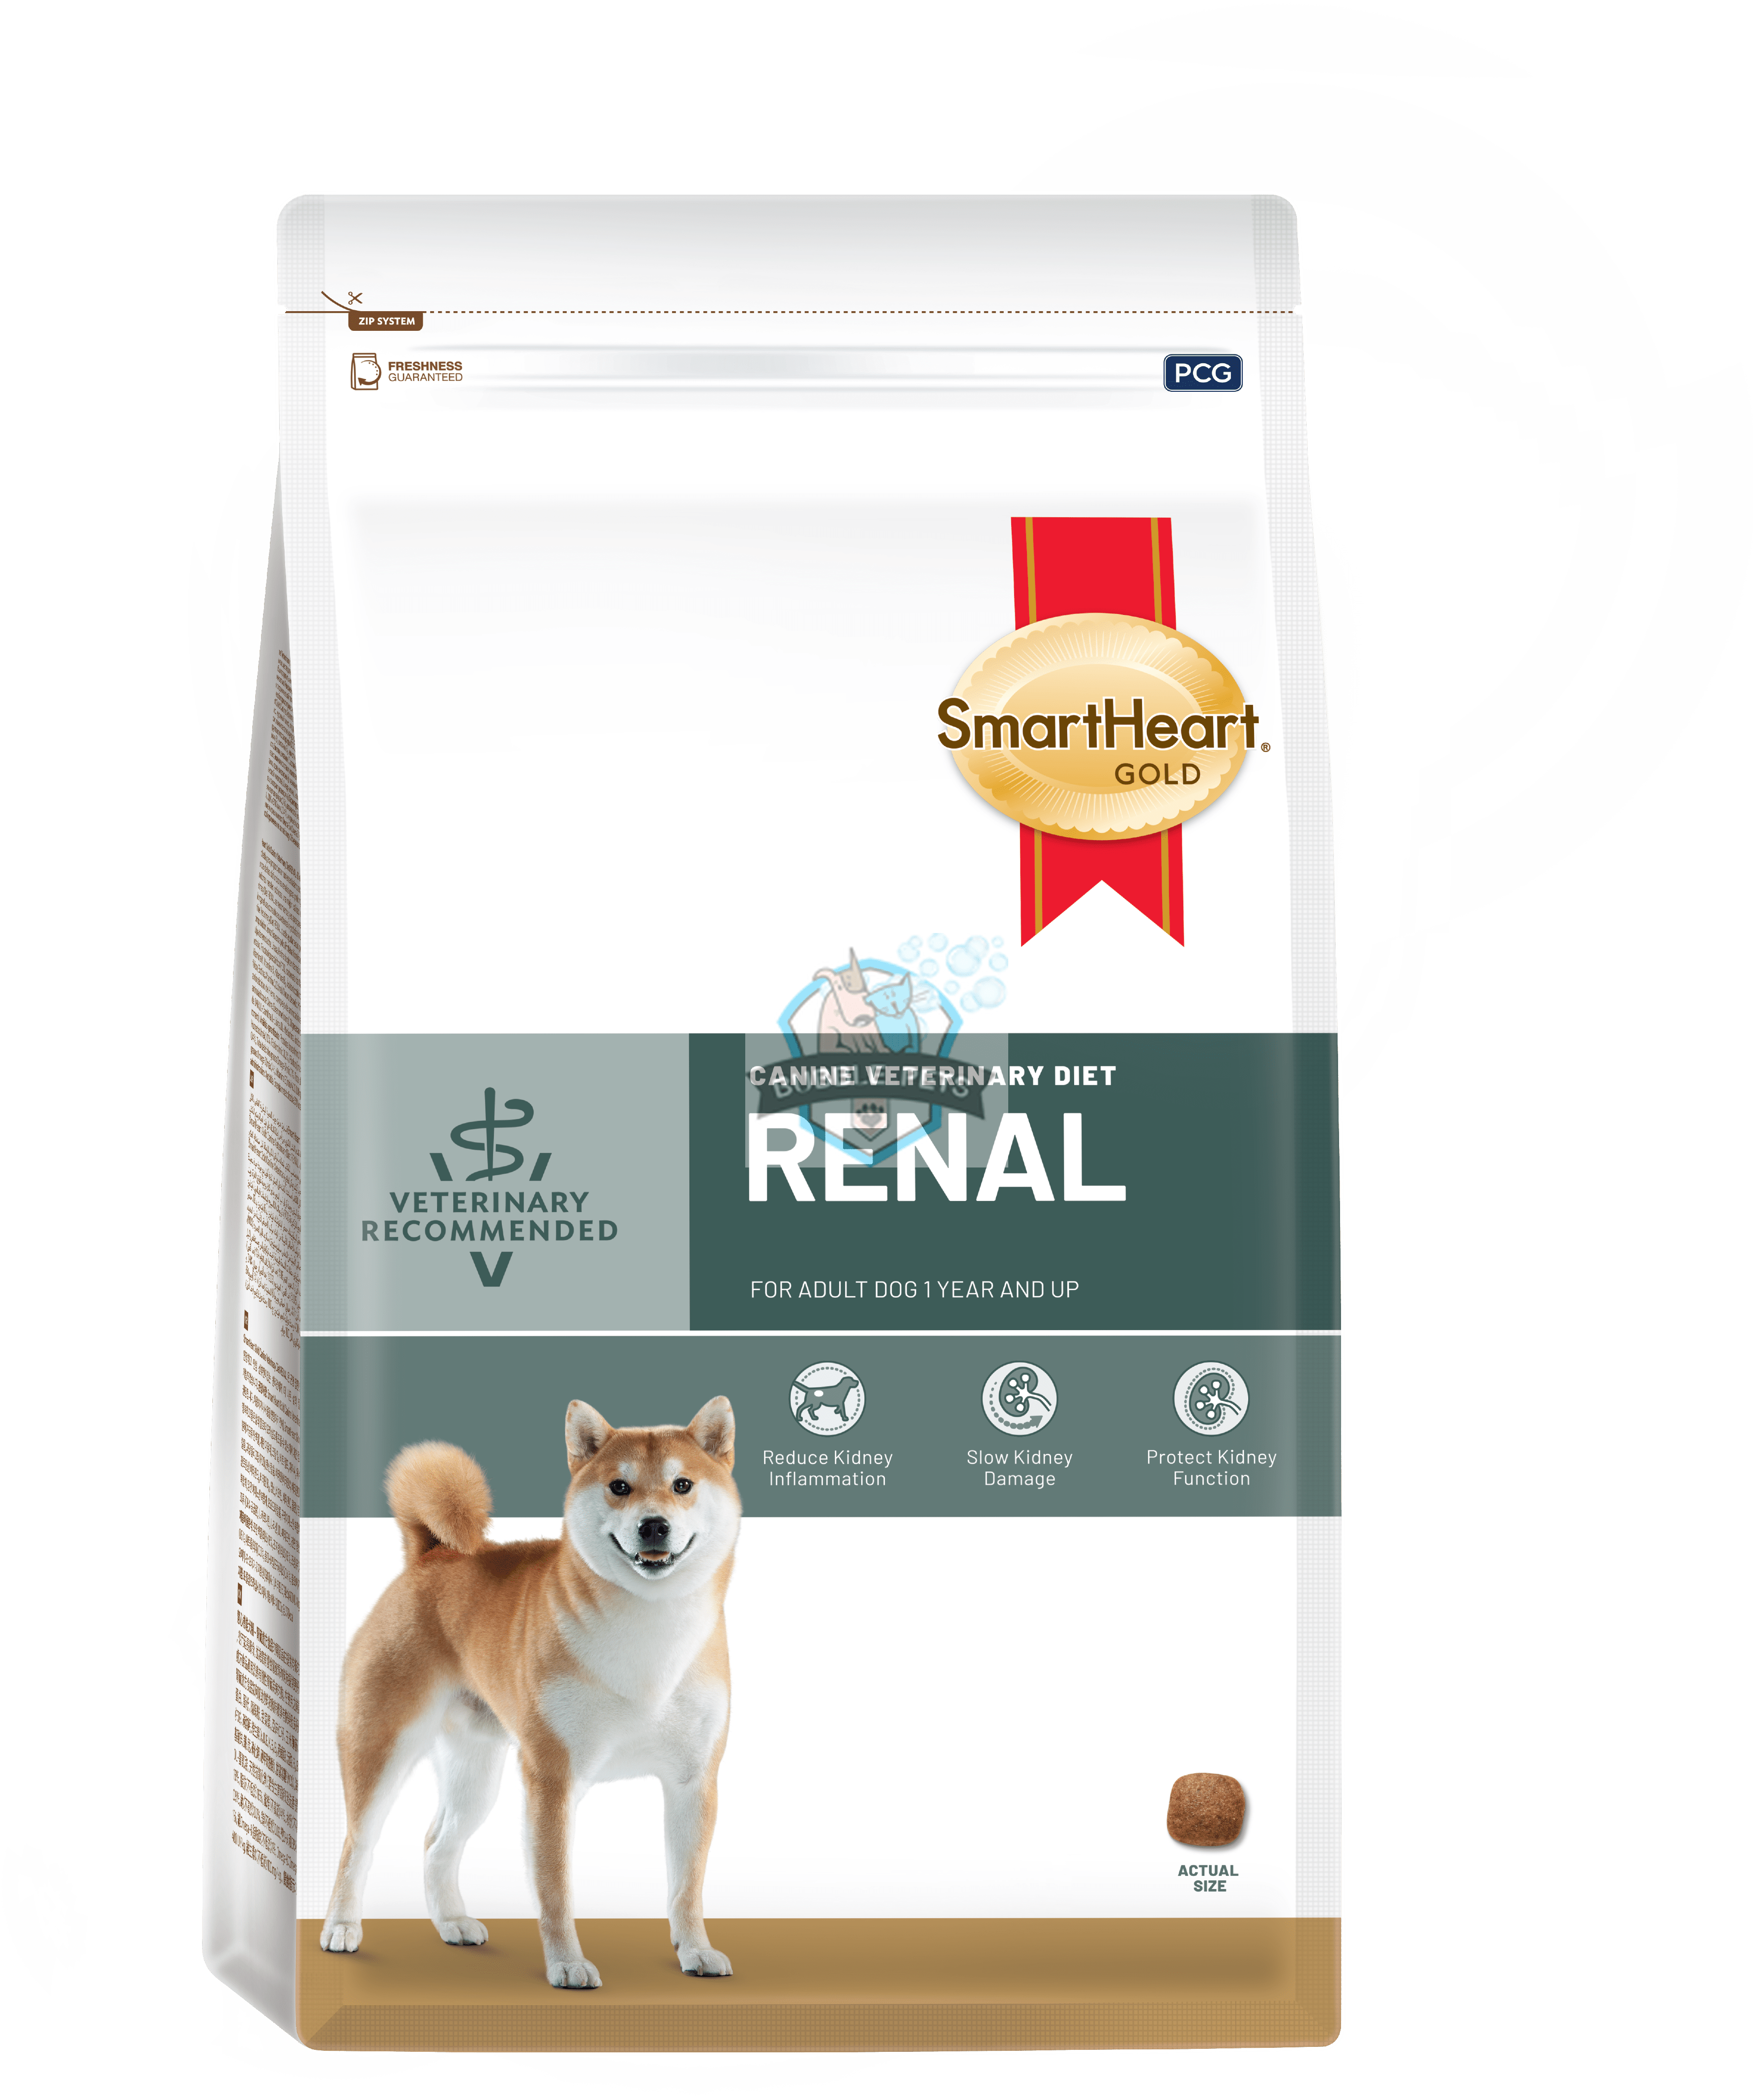 SmartHeart Gold Canine Veterinary Diet (Renal) for Dogs